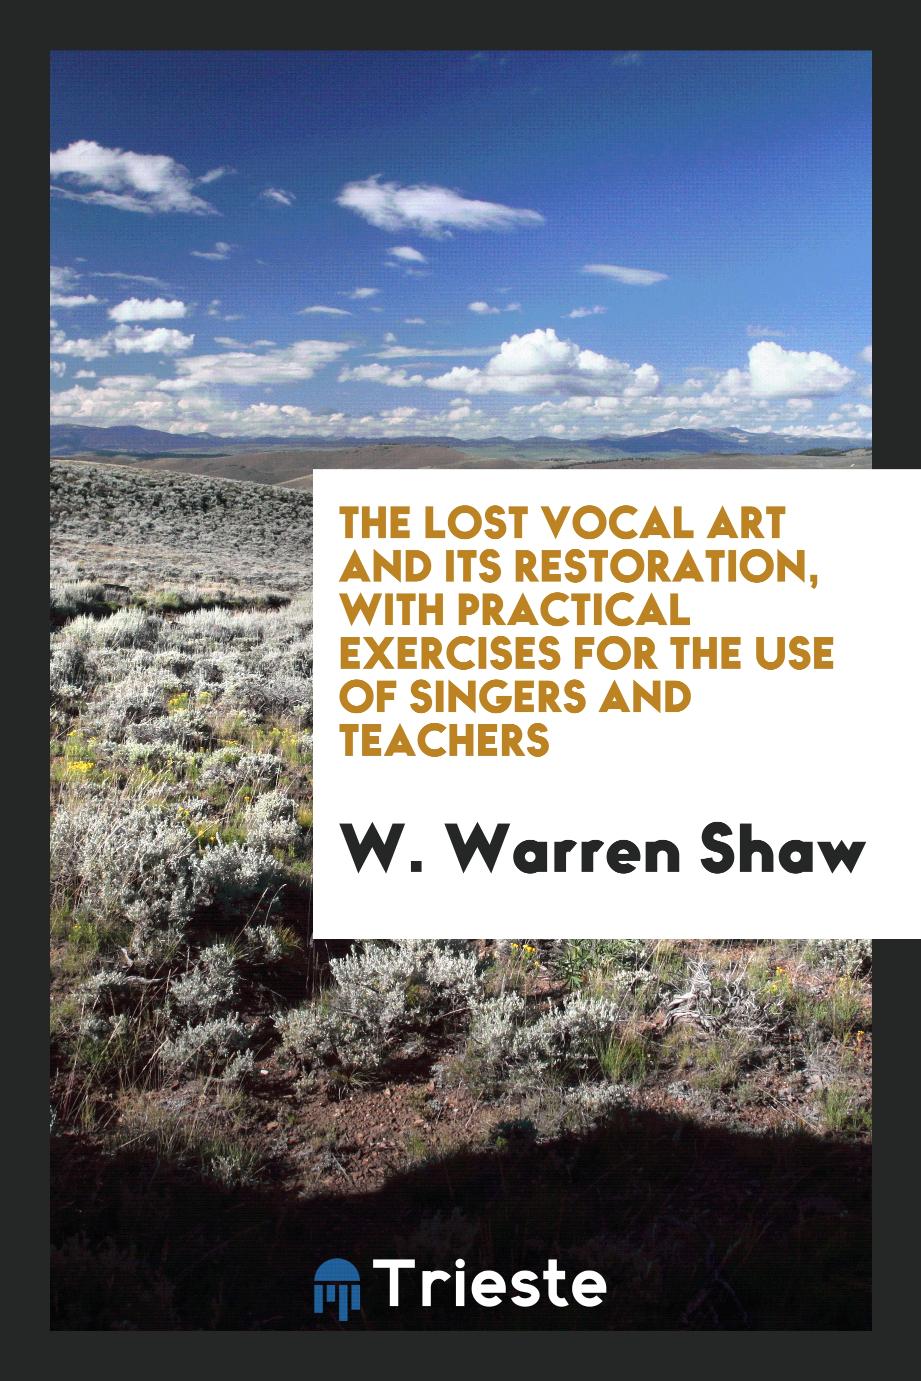 The lost vocal art and its restoration, with practical exercises for the use of singers and teachers